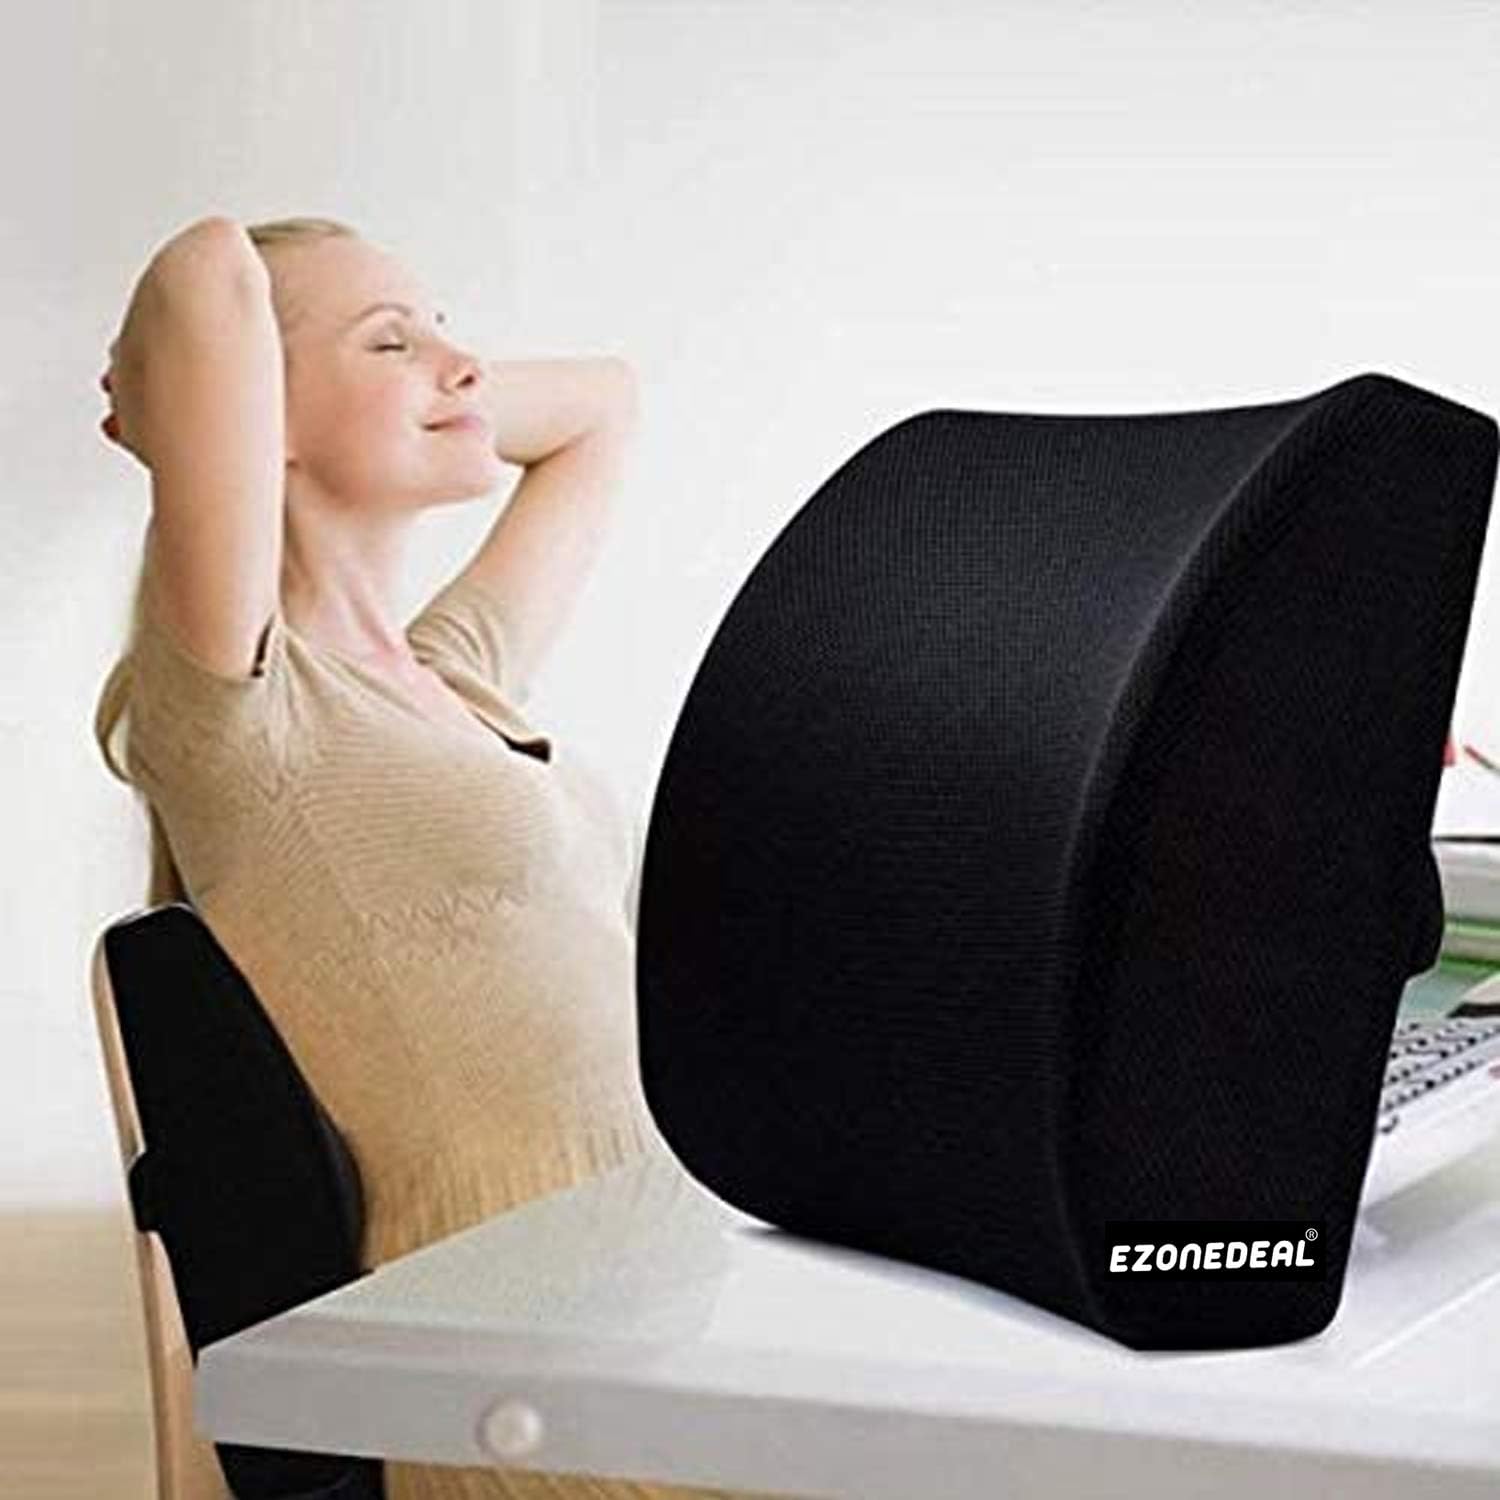 EZONEDEAL Memory Foam Seat Chair Waist Lumbar Back Support Cushion Pillow for Office Home Car Gaming Back Pain Problems Solution